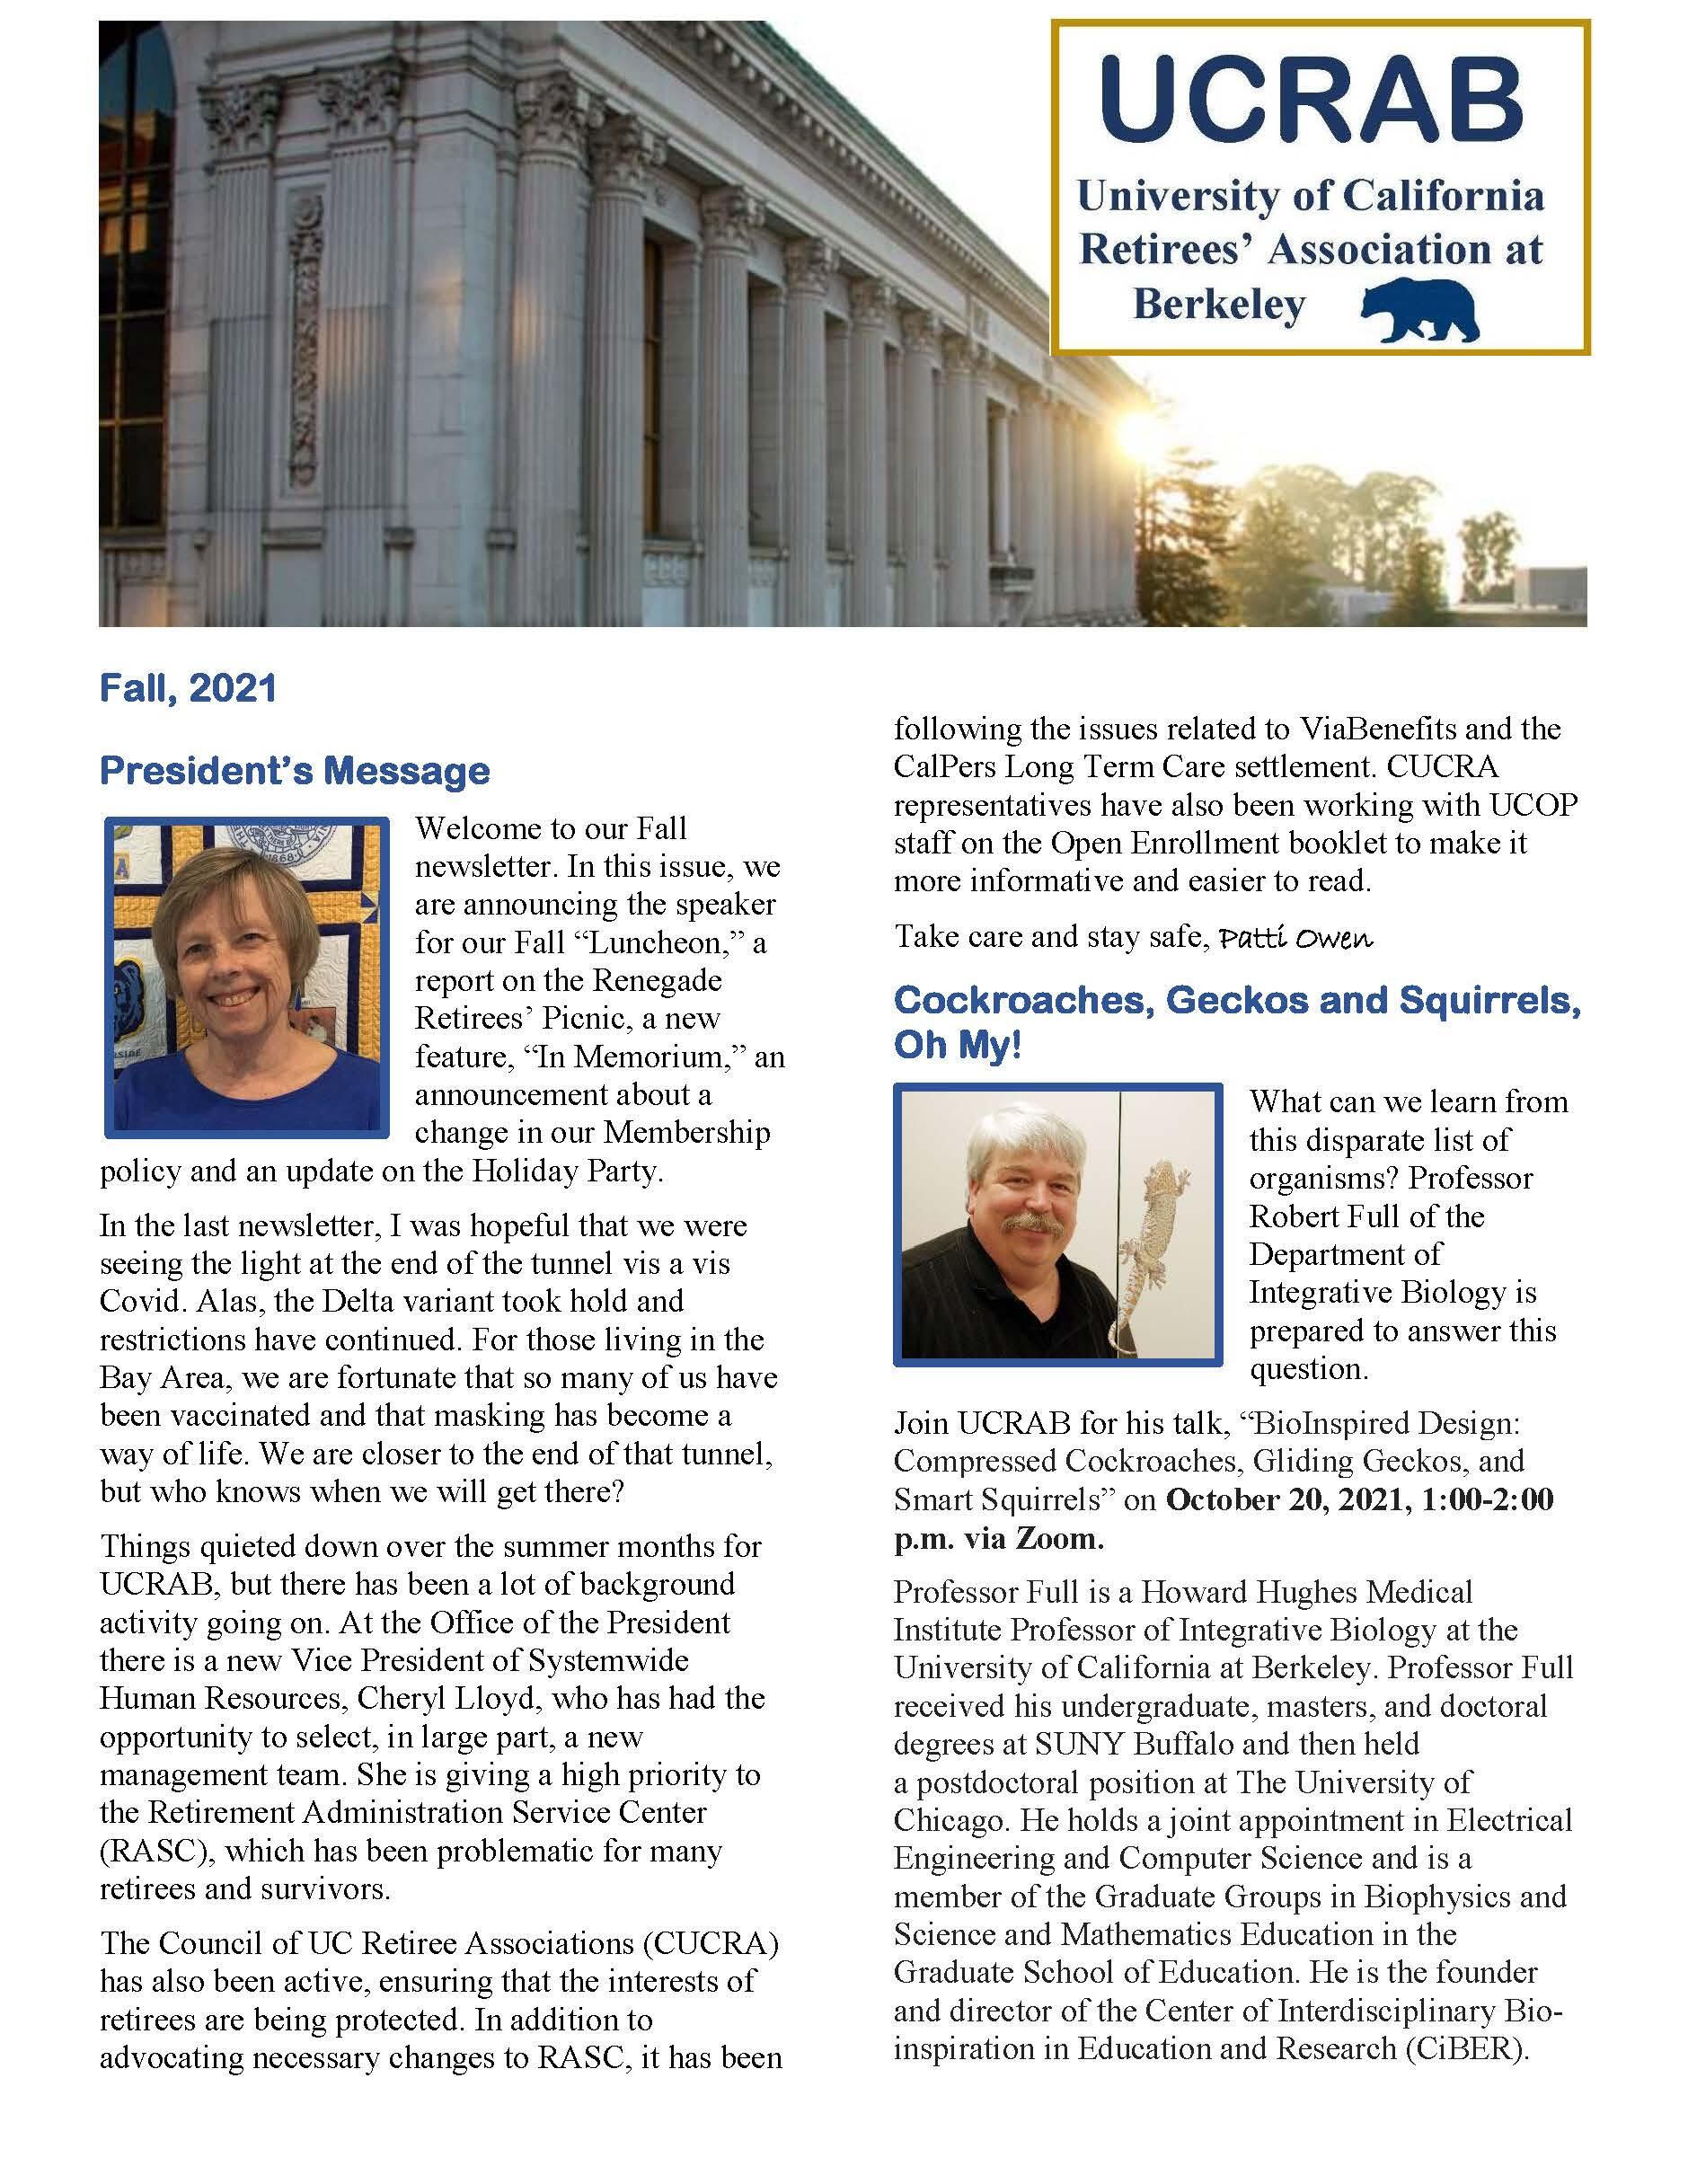 UCRAB Fall 2021 Newsletter front page